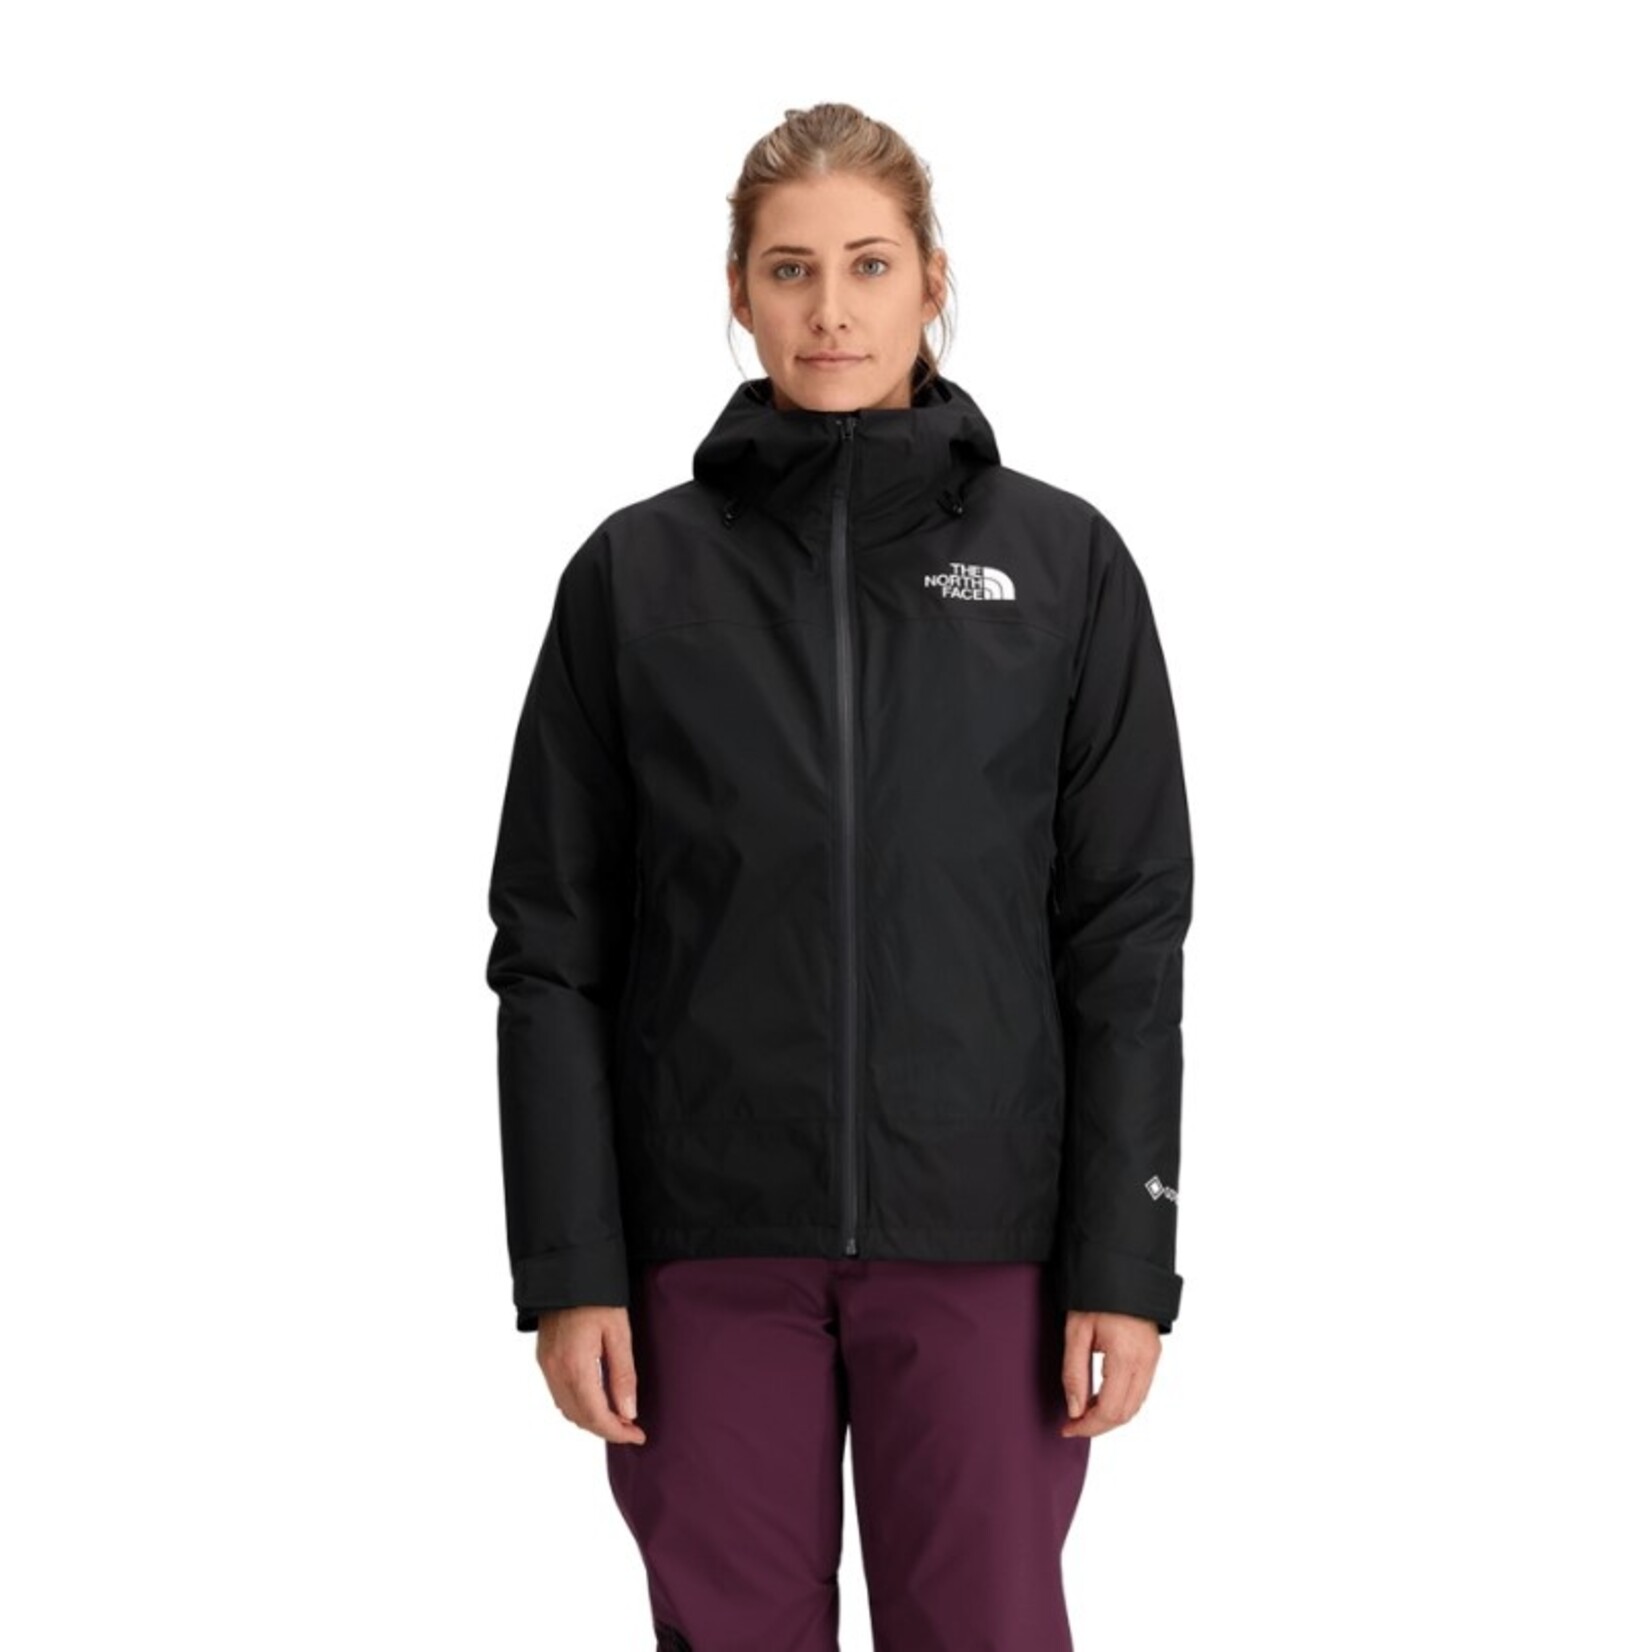 THE NORTH FACE Men’s Mountain Light Triclimate® GORE-TEX® Jacket